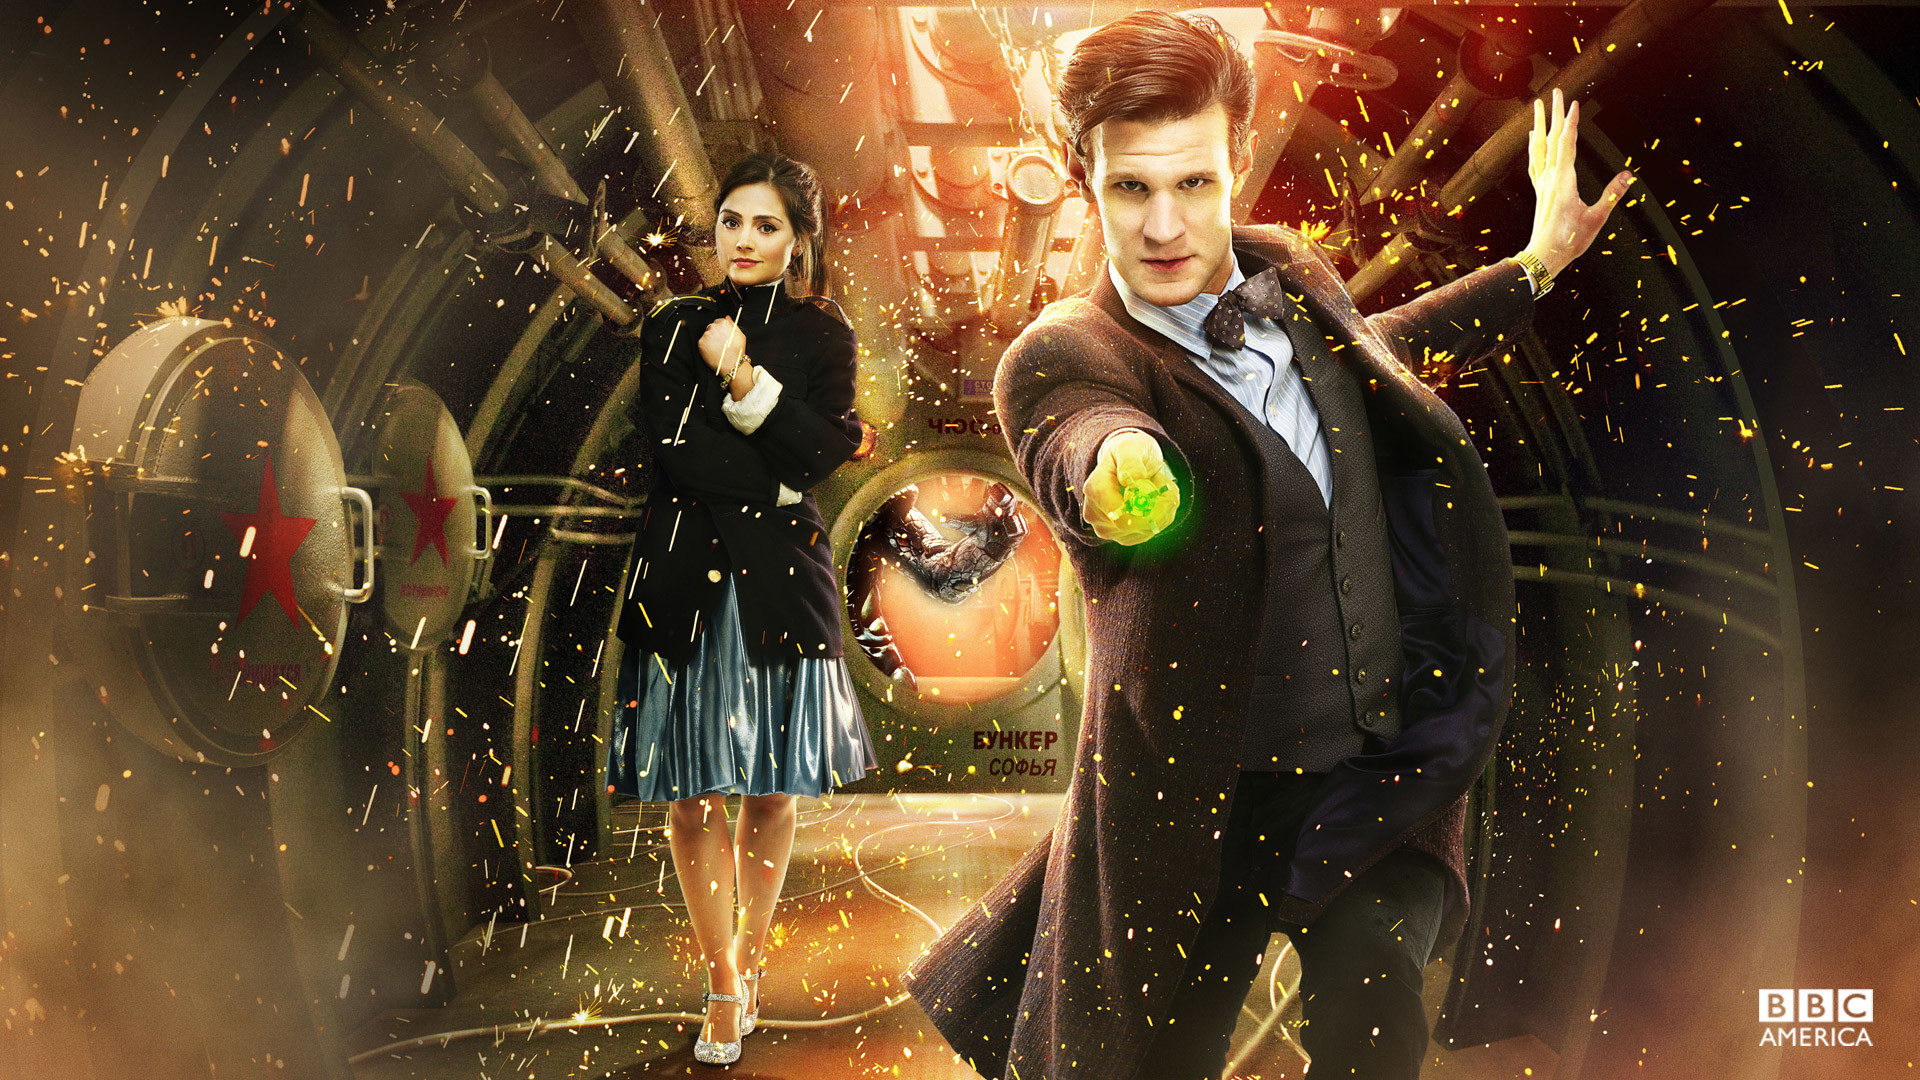 1920x1080 Doctor Who Animated Wallpaper